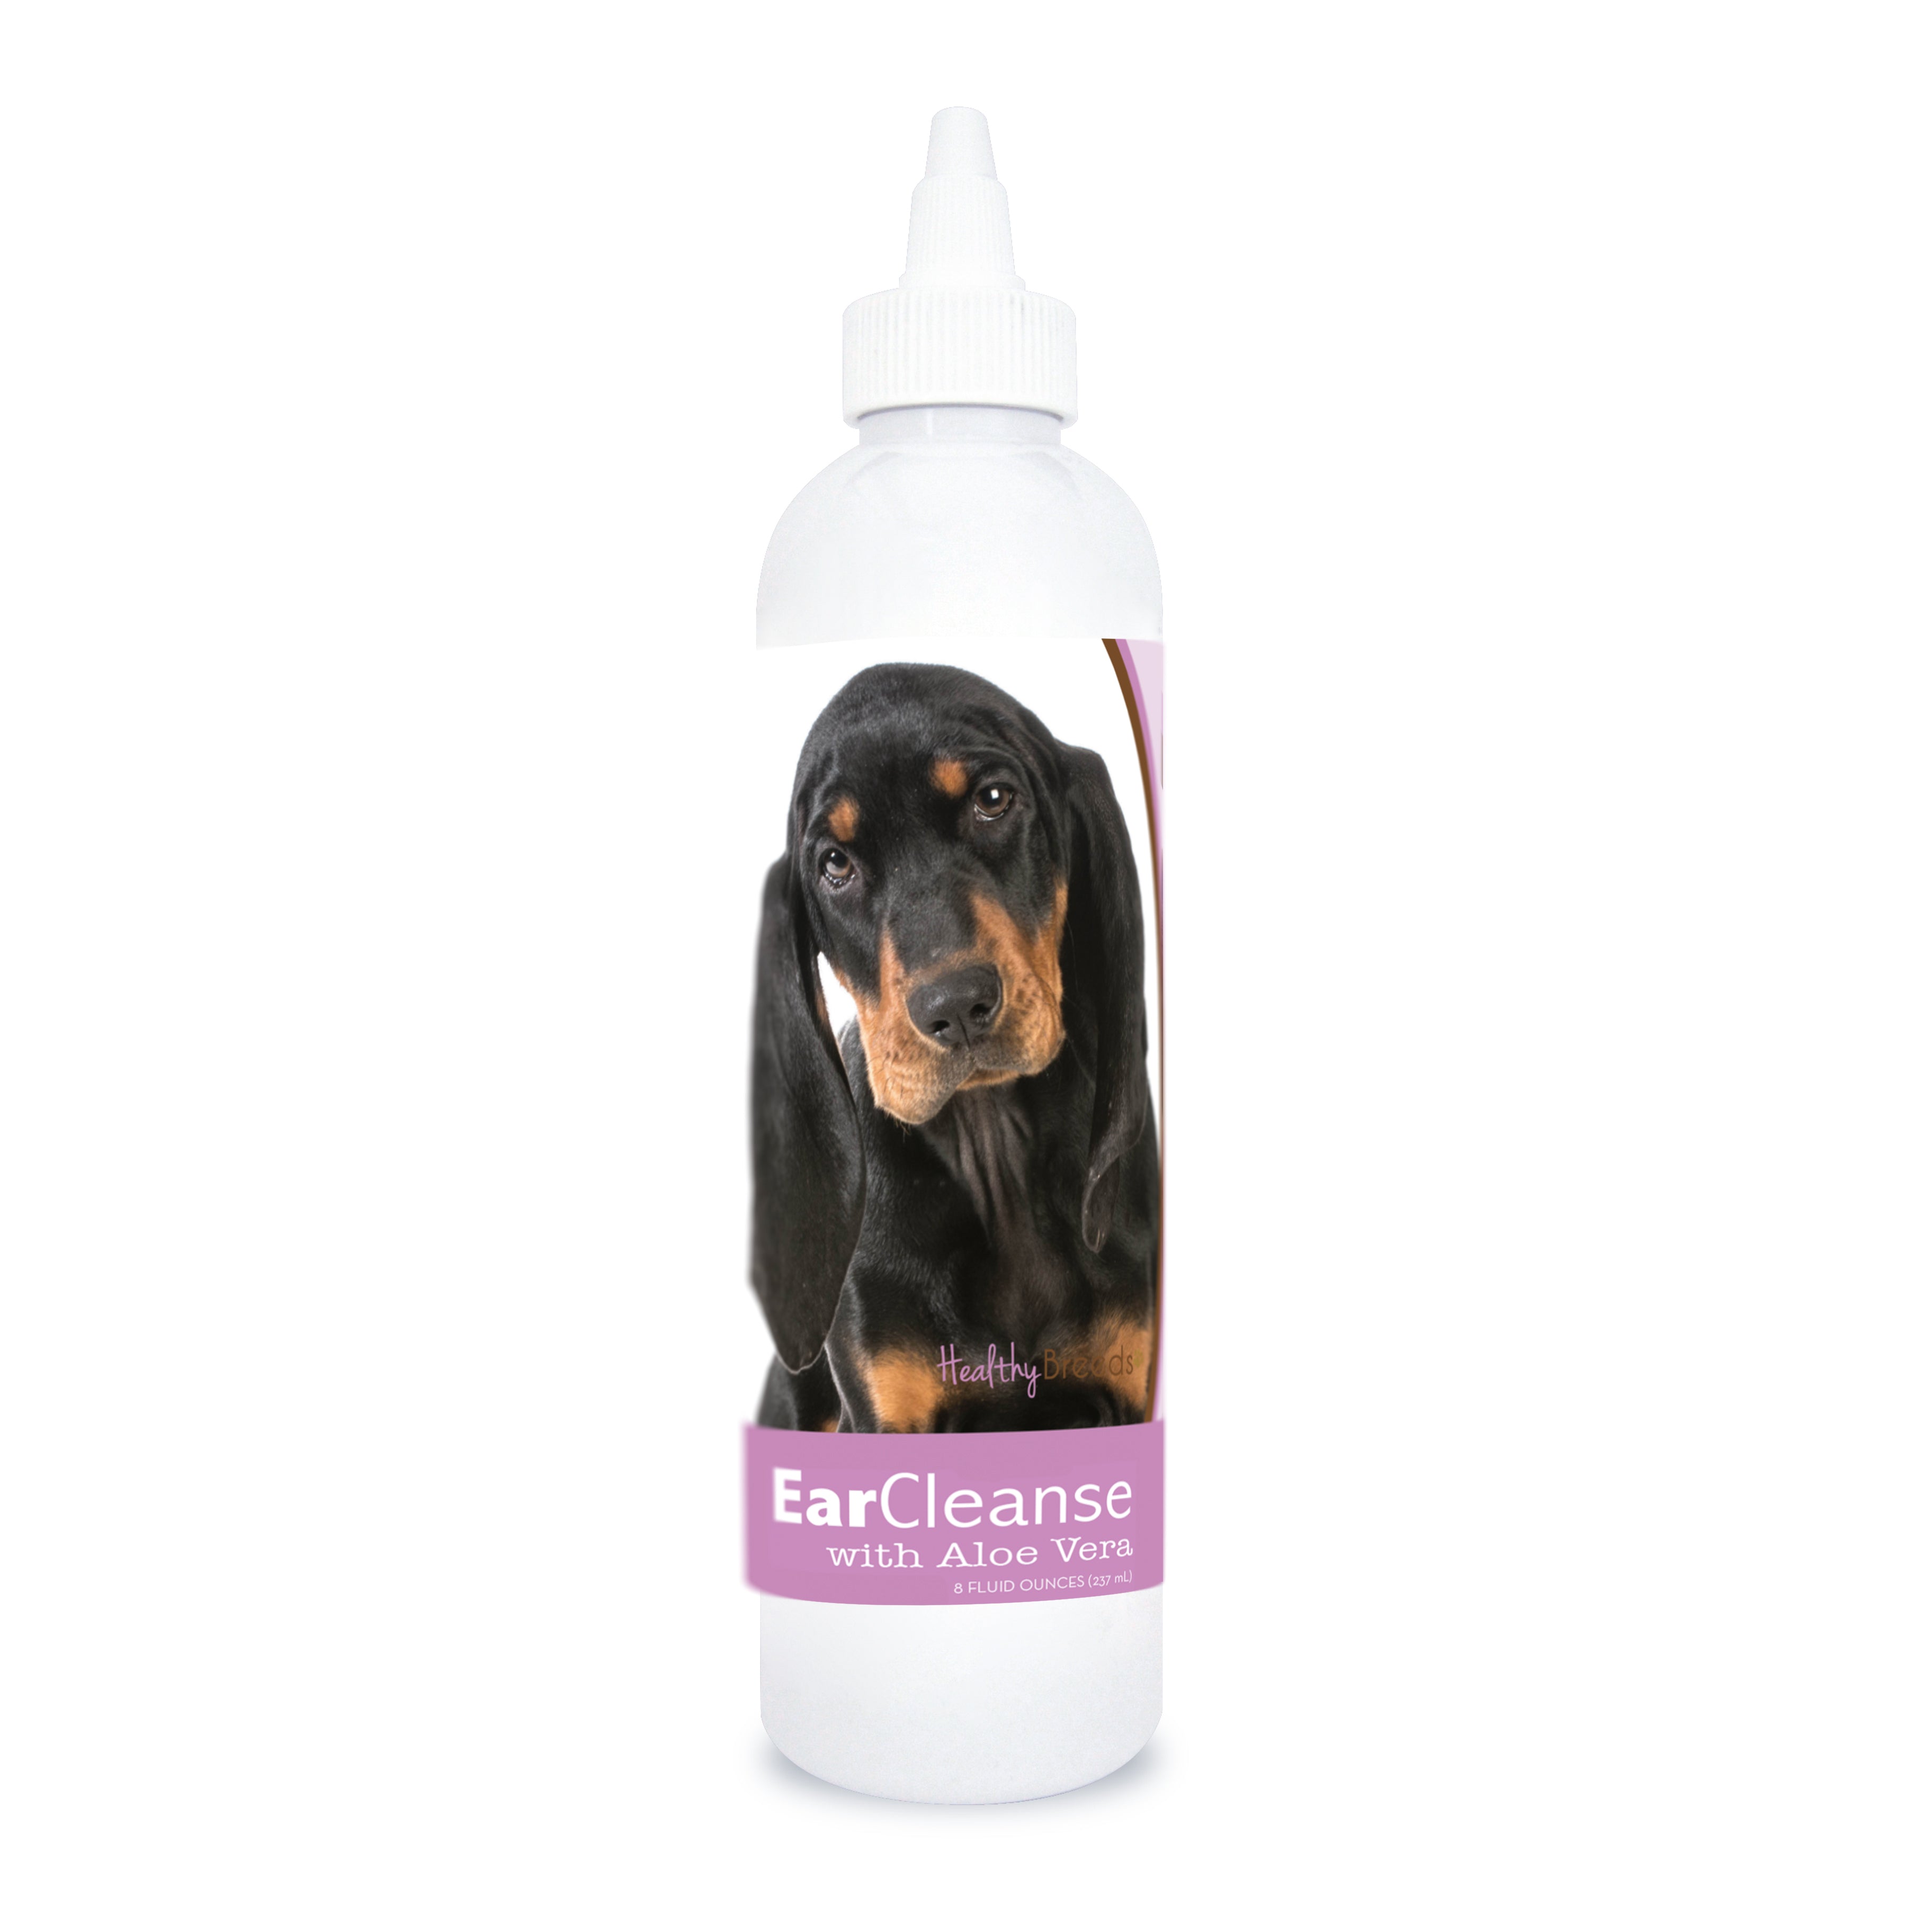 Black and Tan Coonhound Ear Cleanse with Aloe Vera Sweet Pea and Vanilla 8 oz